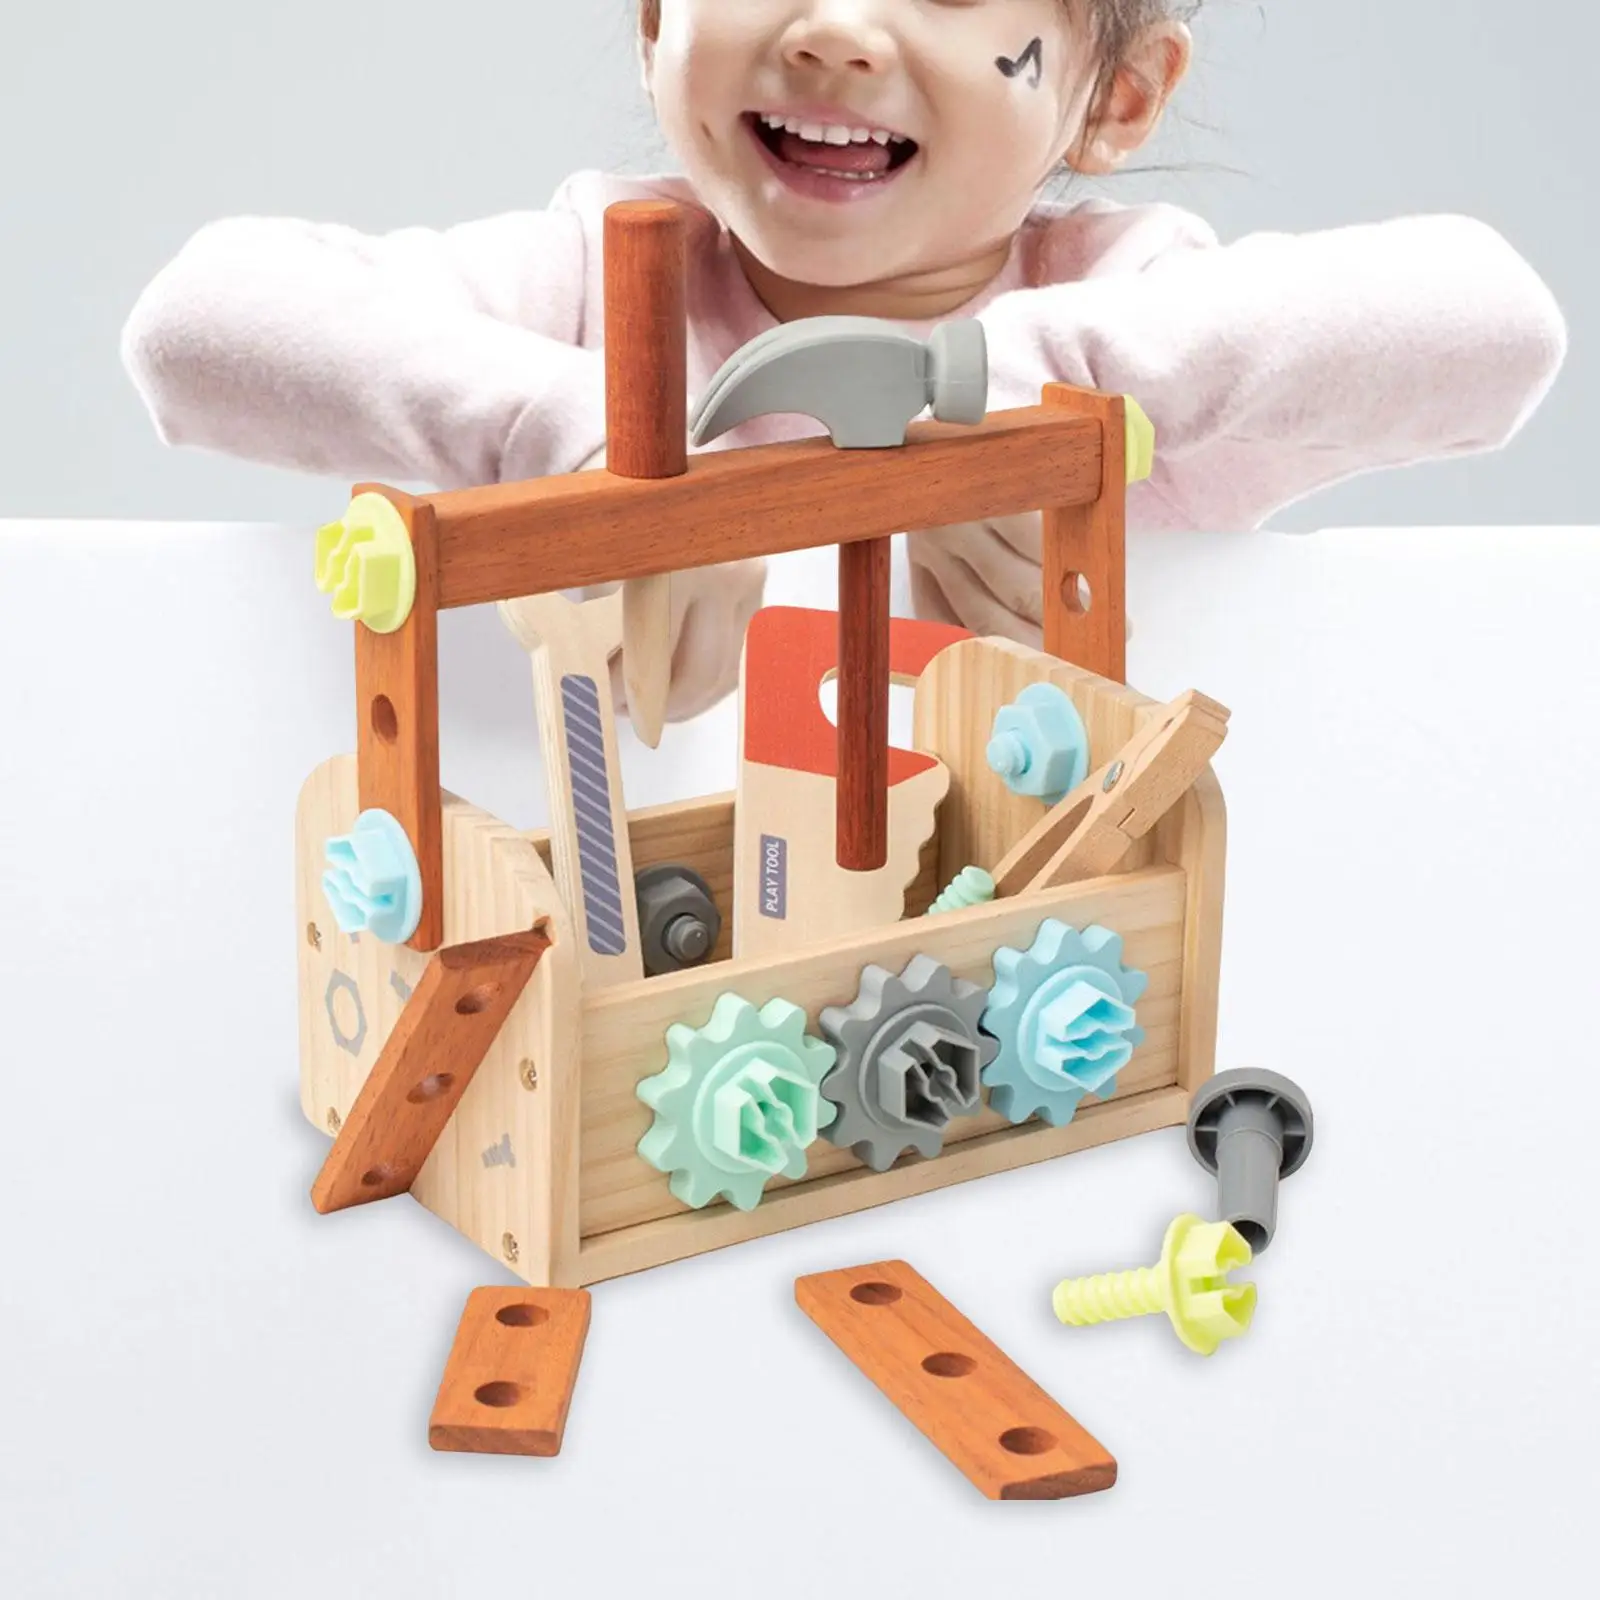 Wood Tool Set for Kids Birthday Gift Gift Wooden Tool Bench Toy for Toddlers